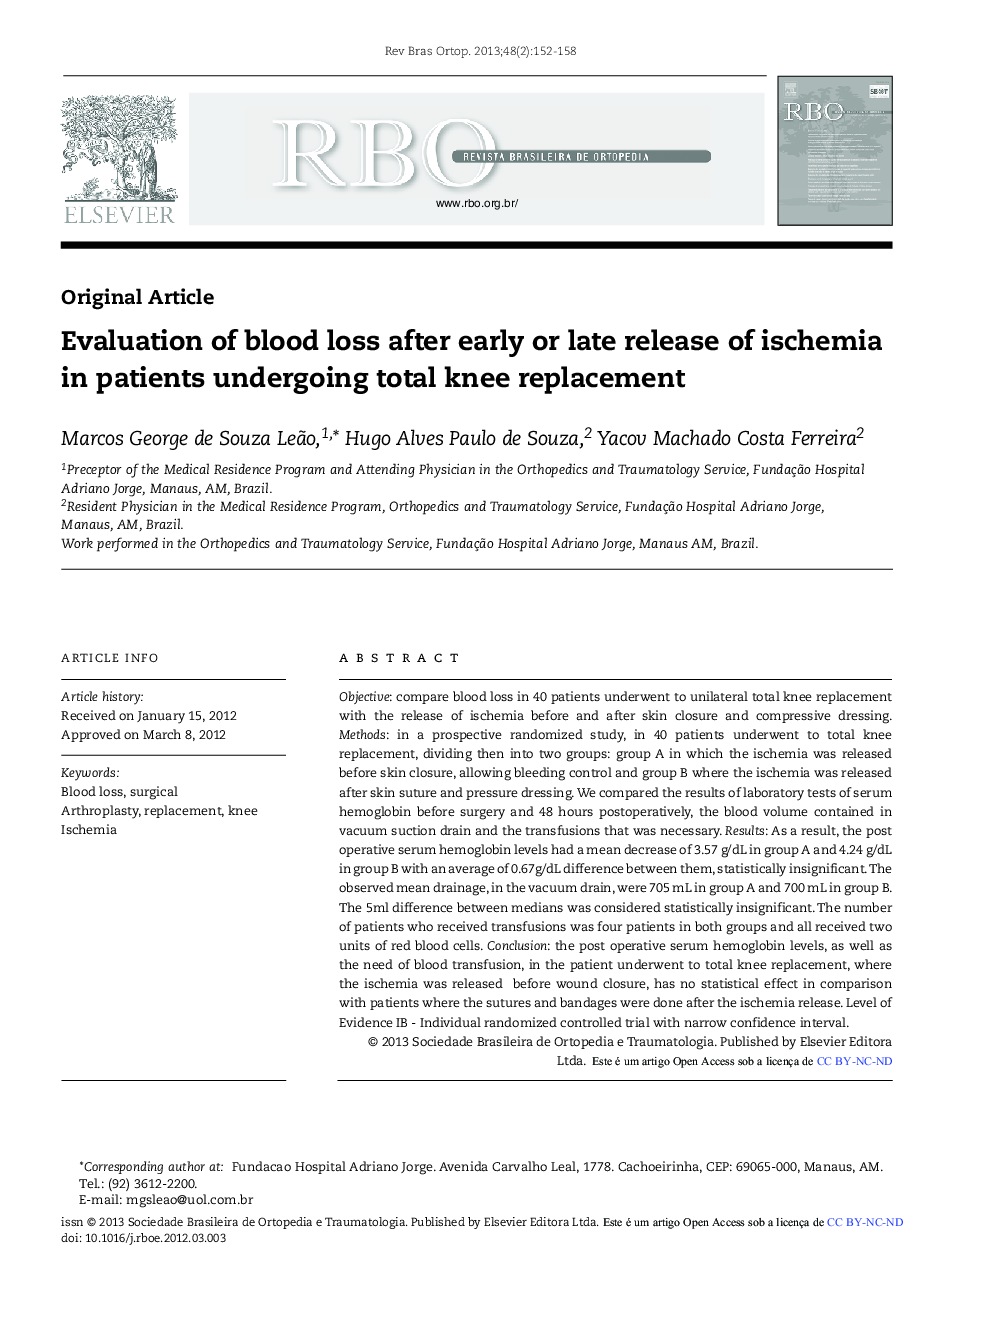 Evaluation of Blood Loss after Early or Late Release of Ischemia in Patients Undergoing Total Knee Replacement 